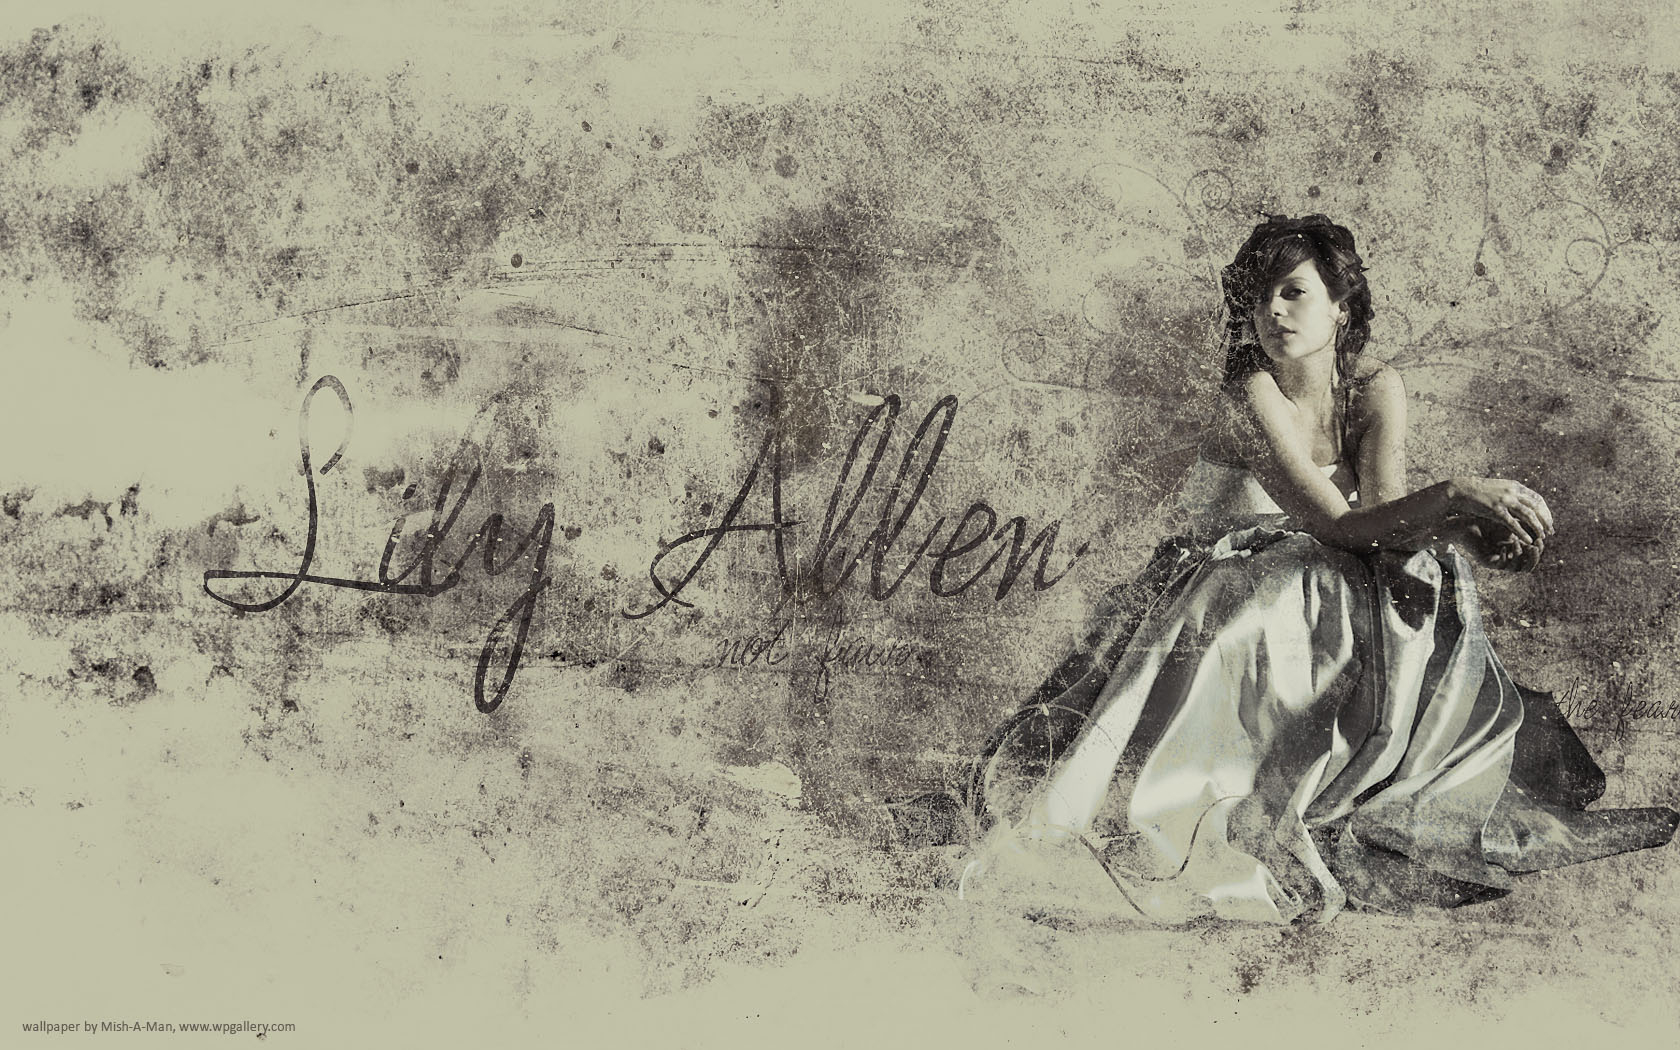 Lily Allen by Mish-A-Man